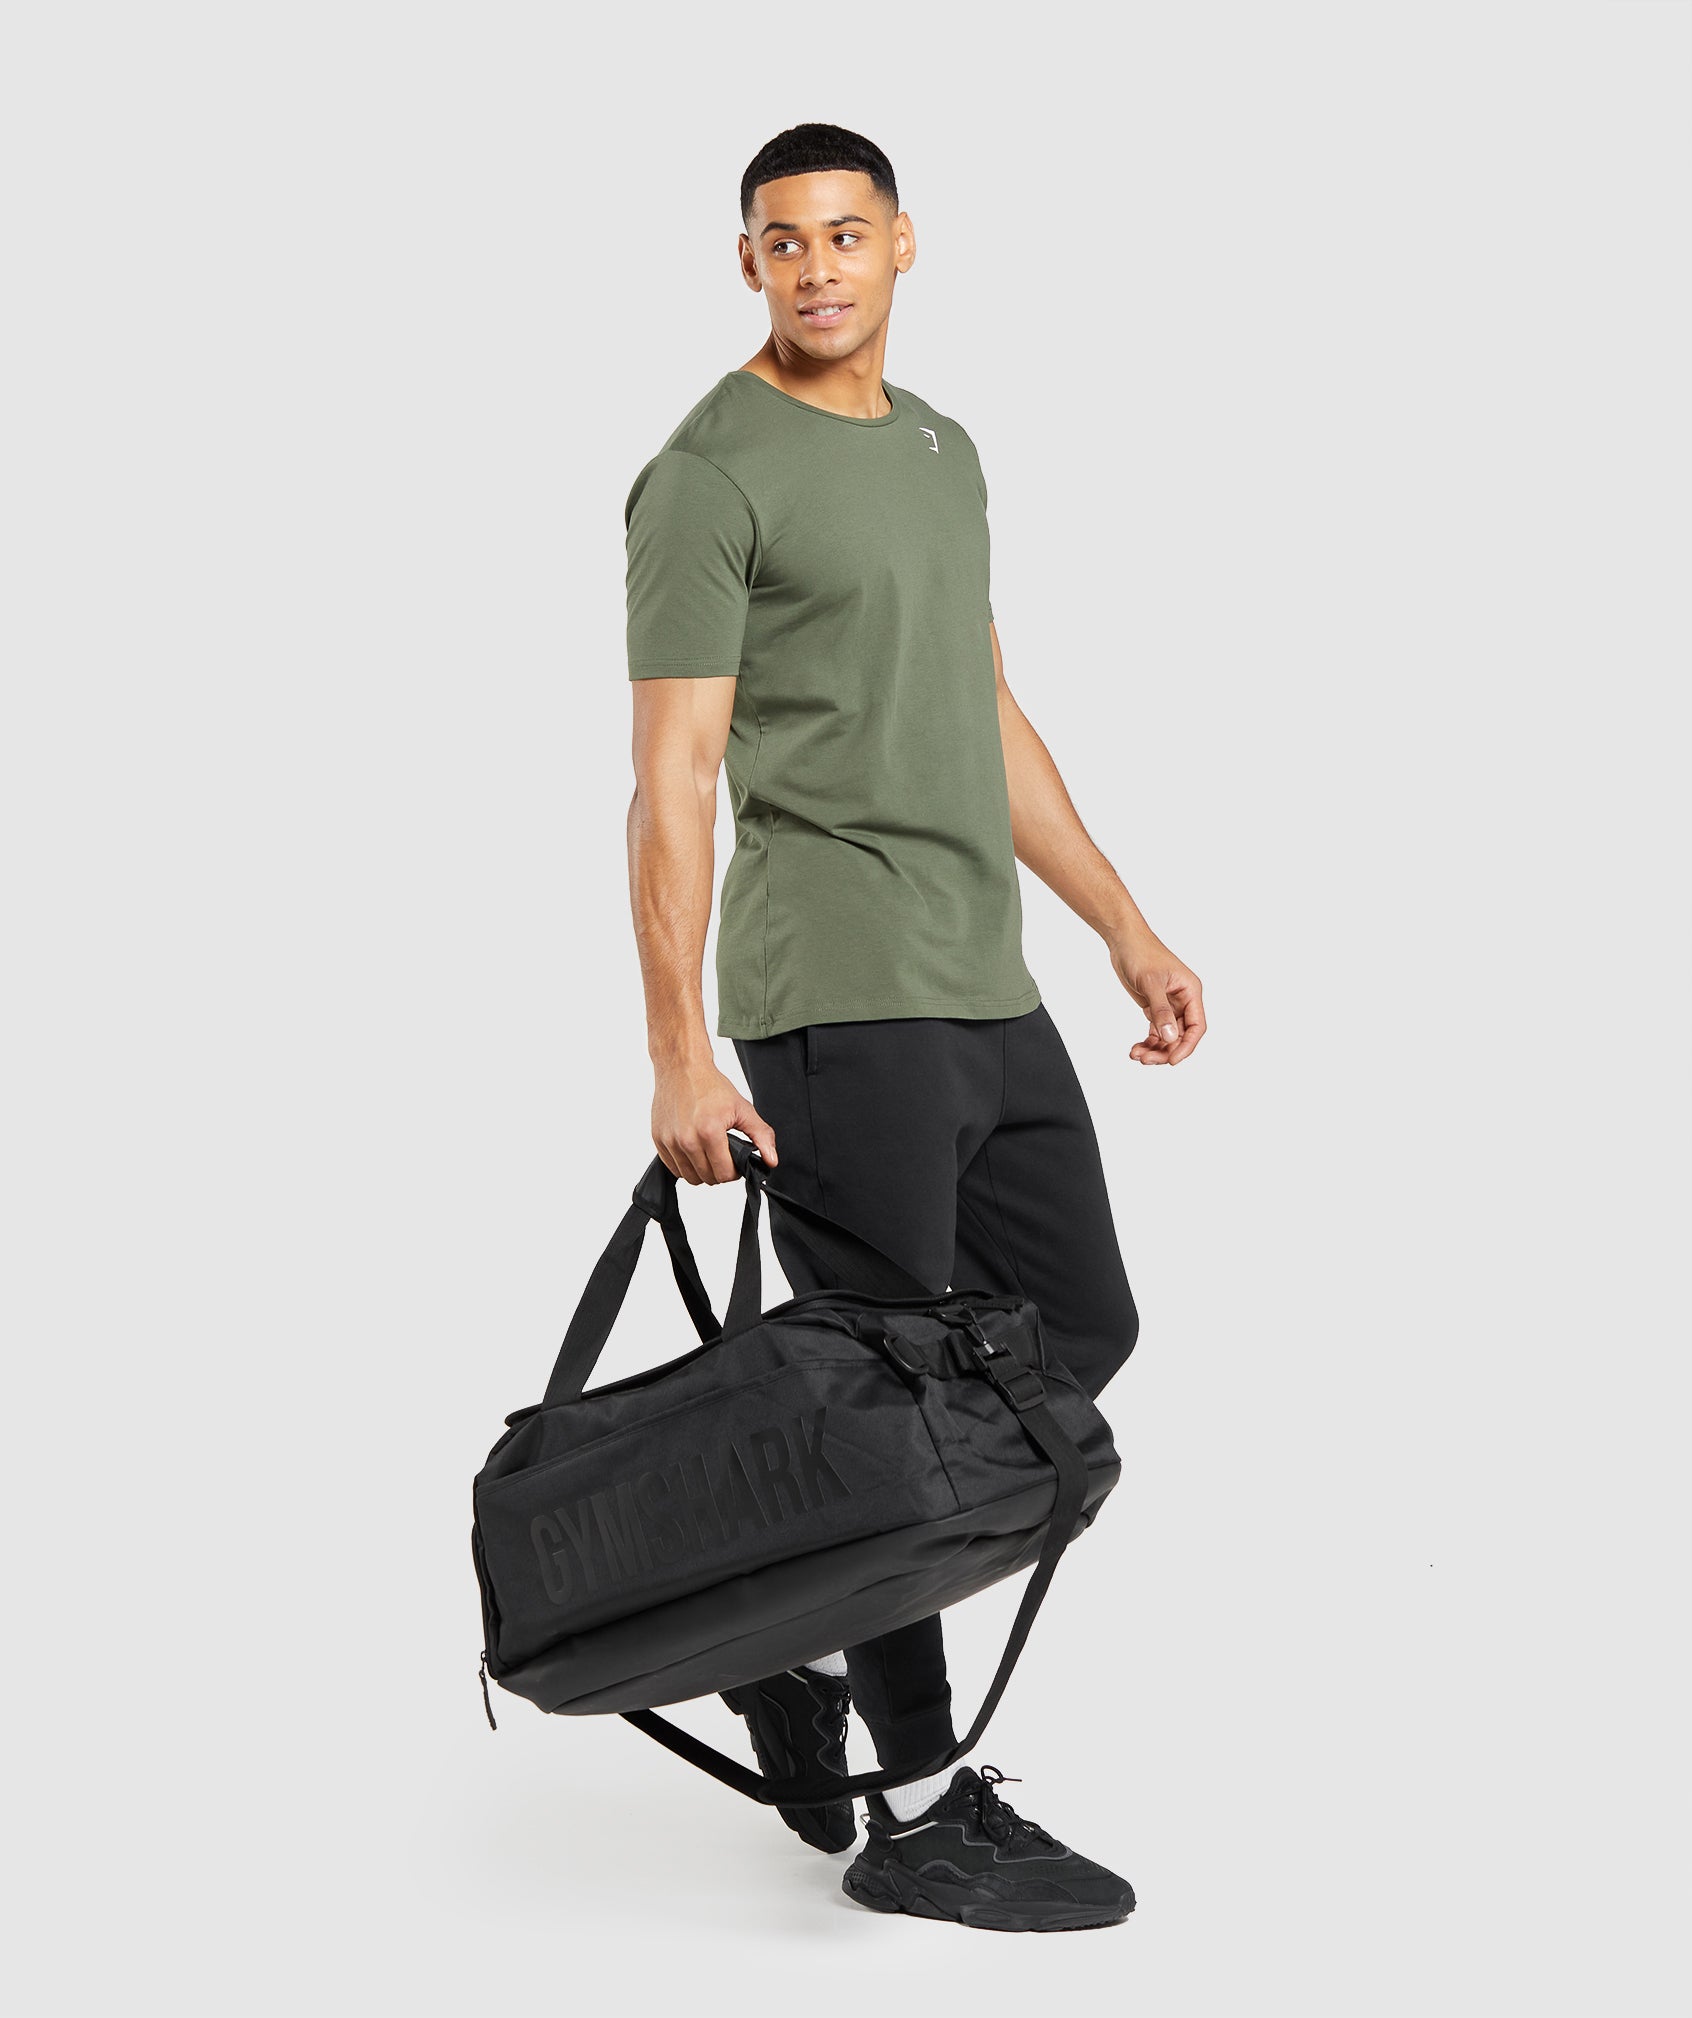 Essential T-Shirt in Core Olive - view 4